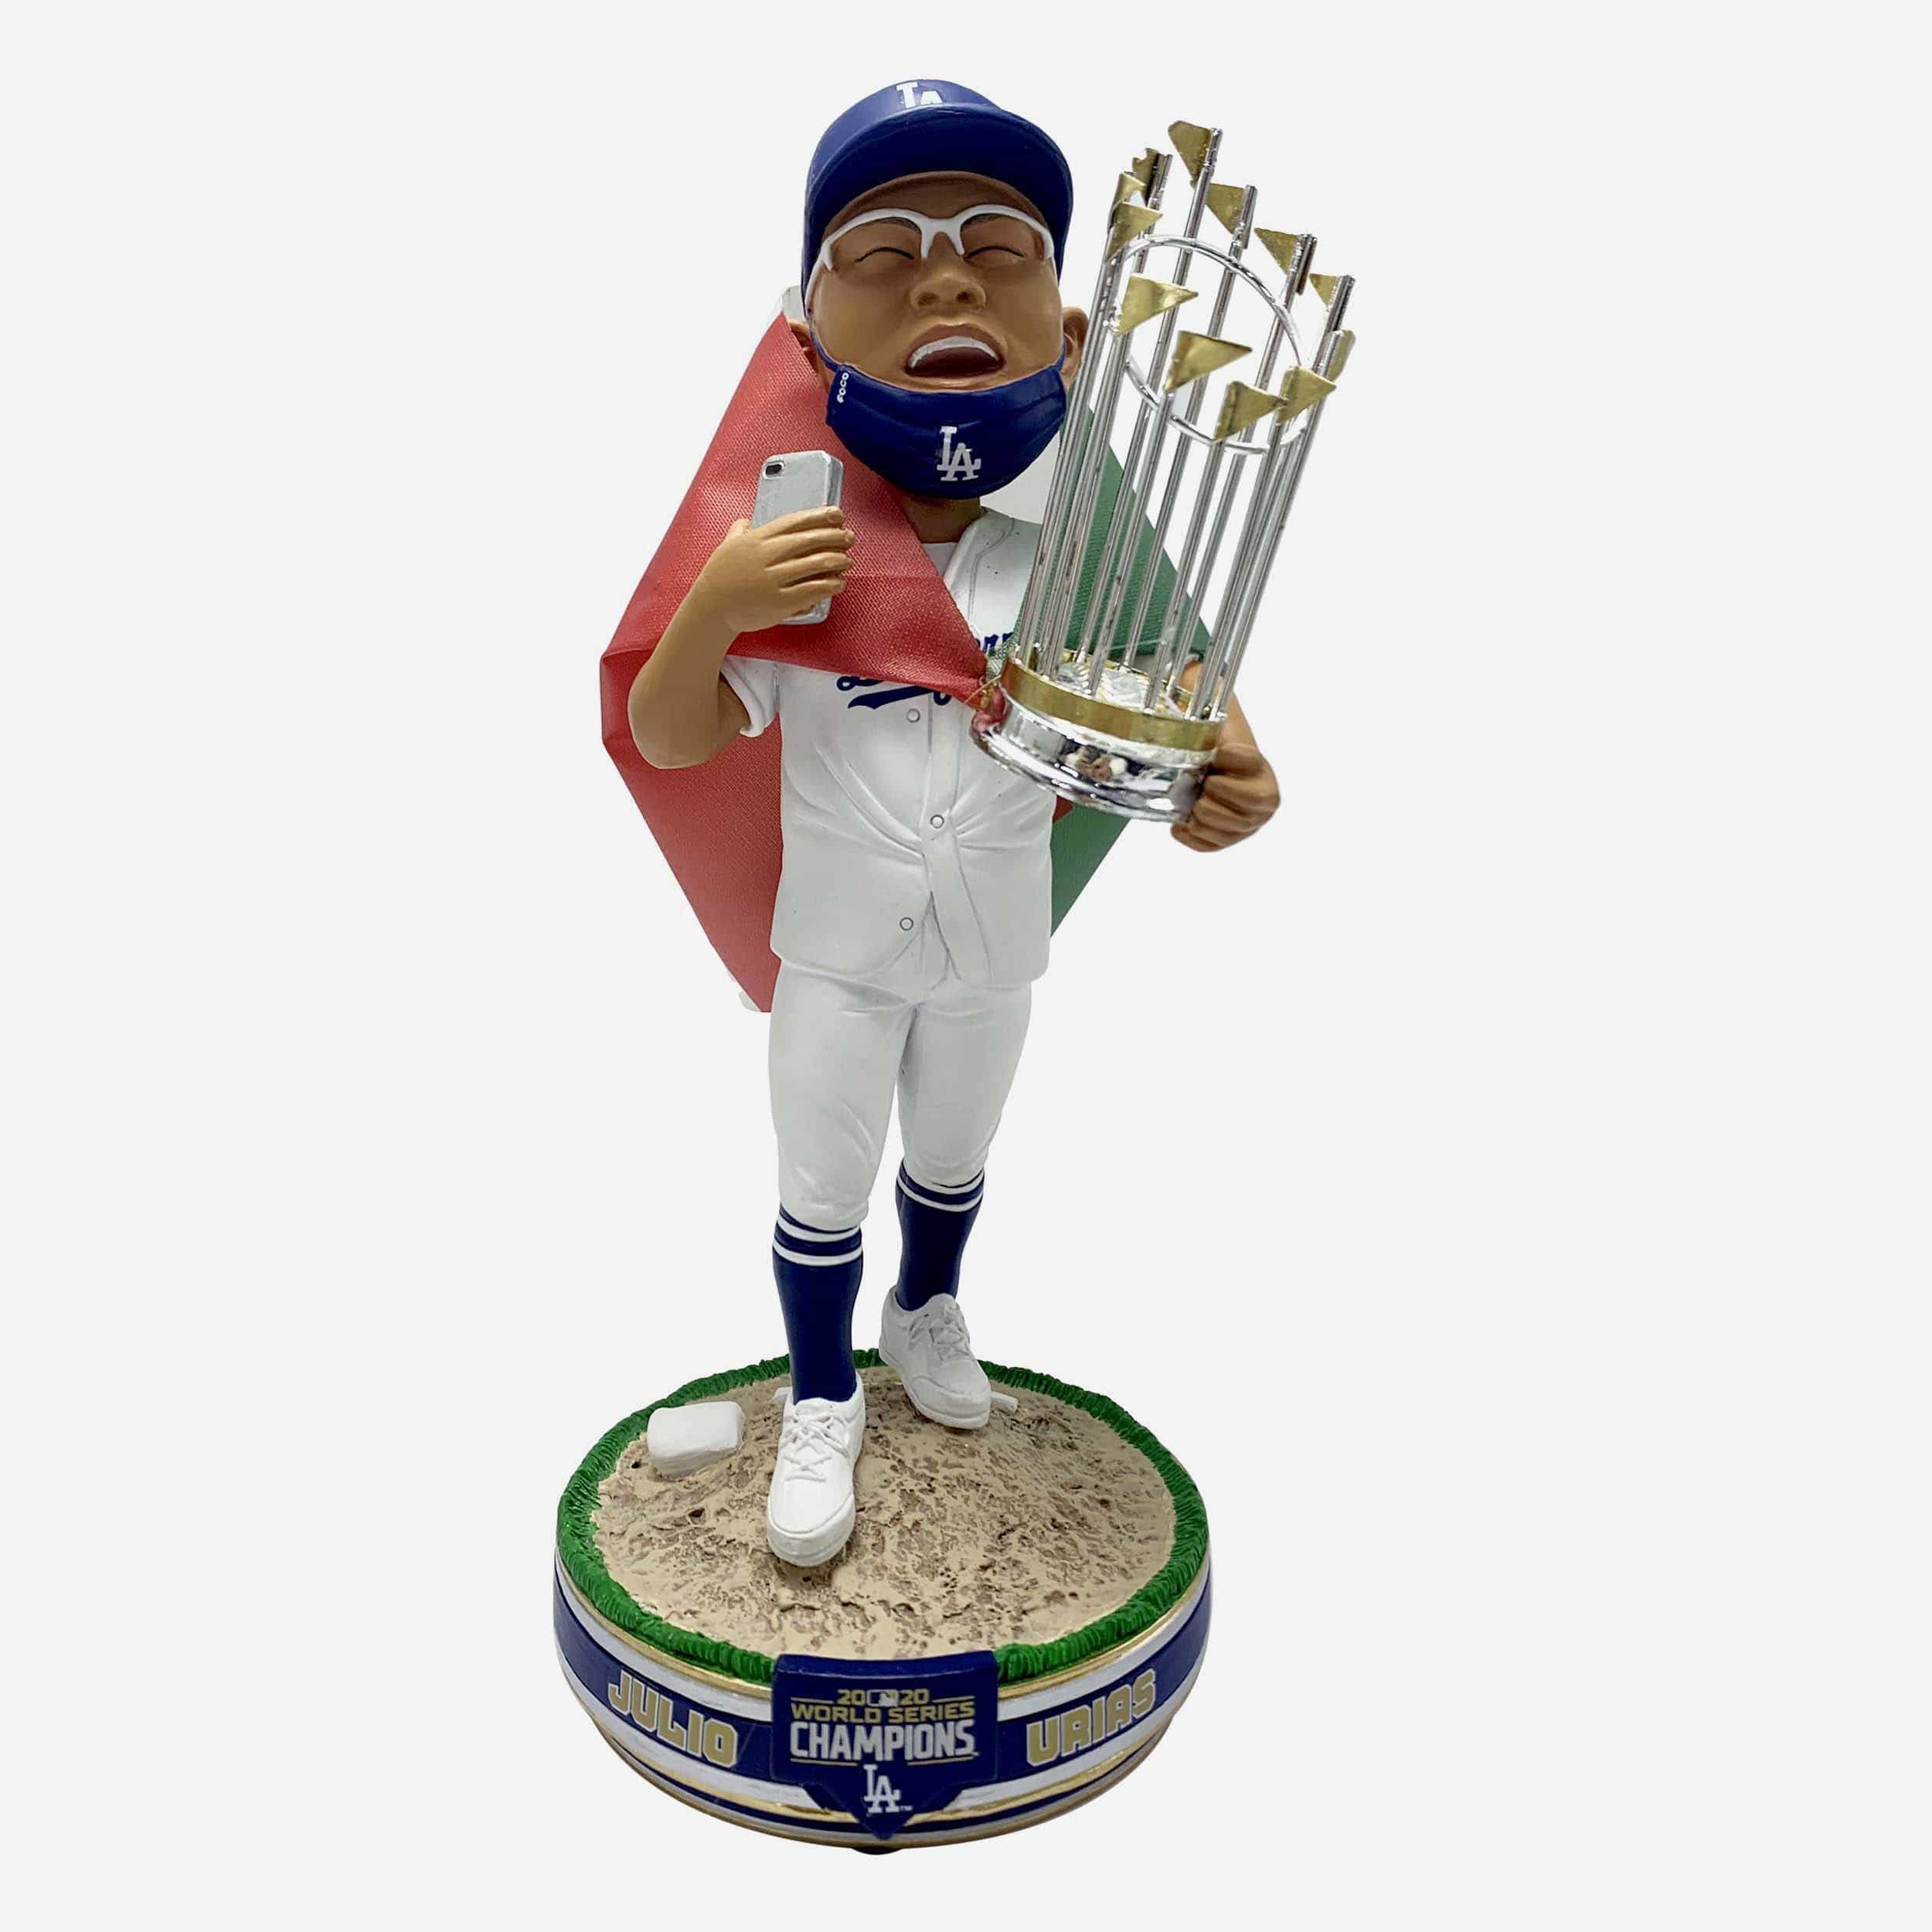 🚨Giveaway Time 🚨 We are Giving Away 1 Julio Urias Bobblehead